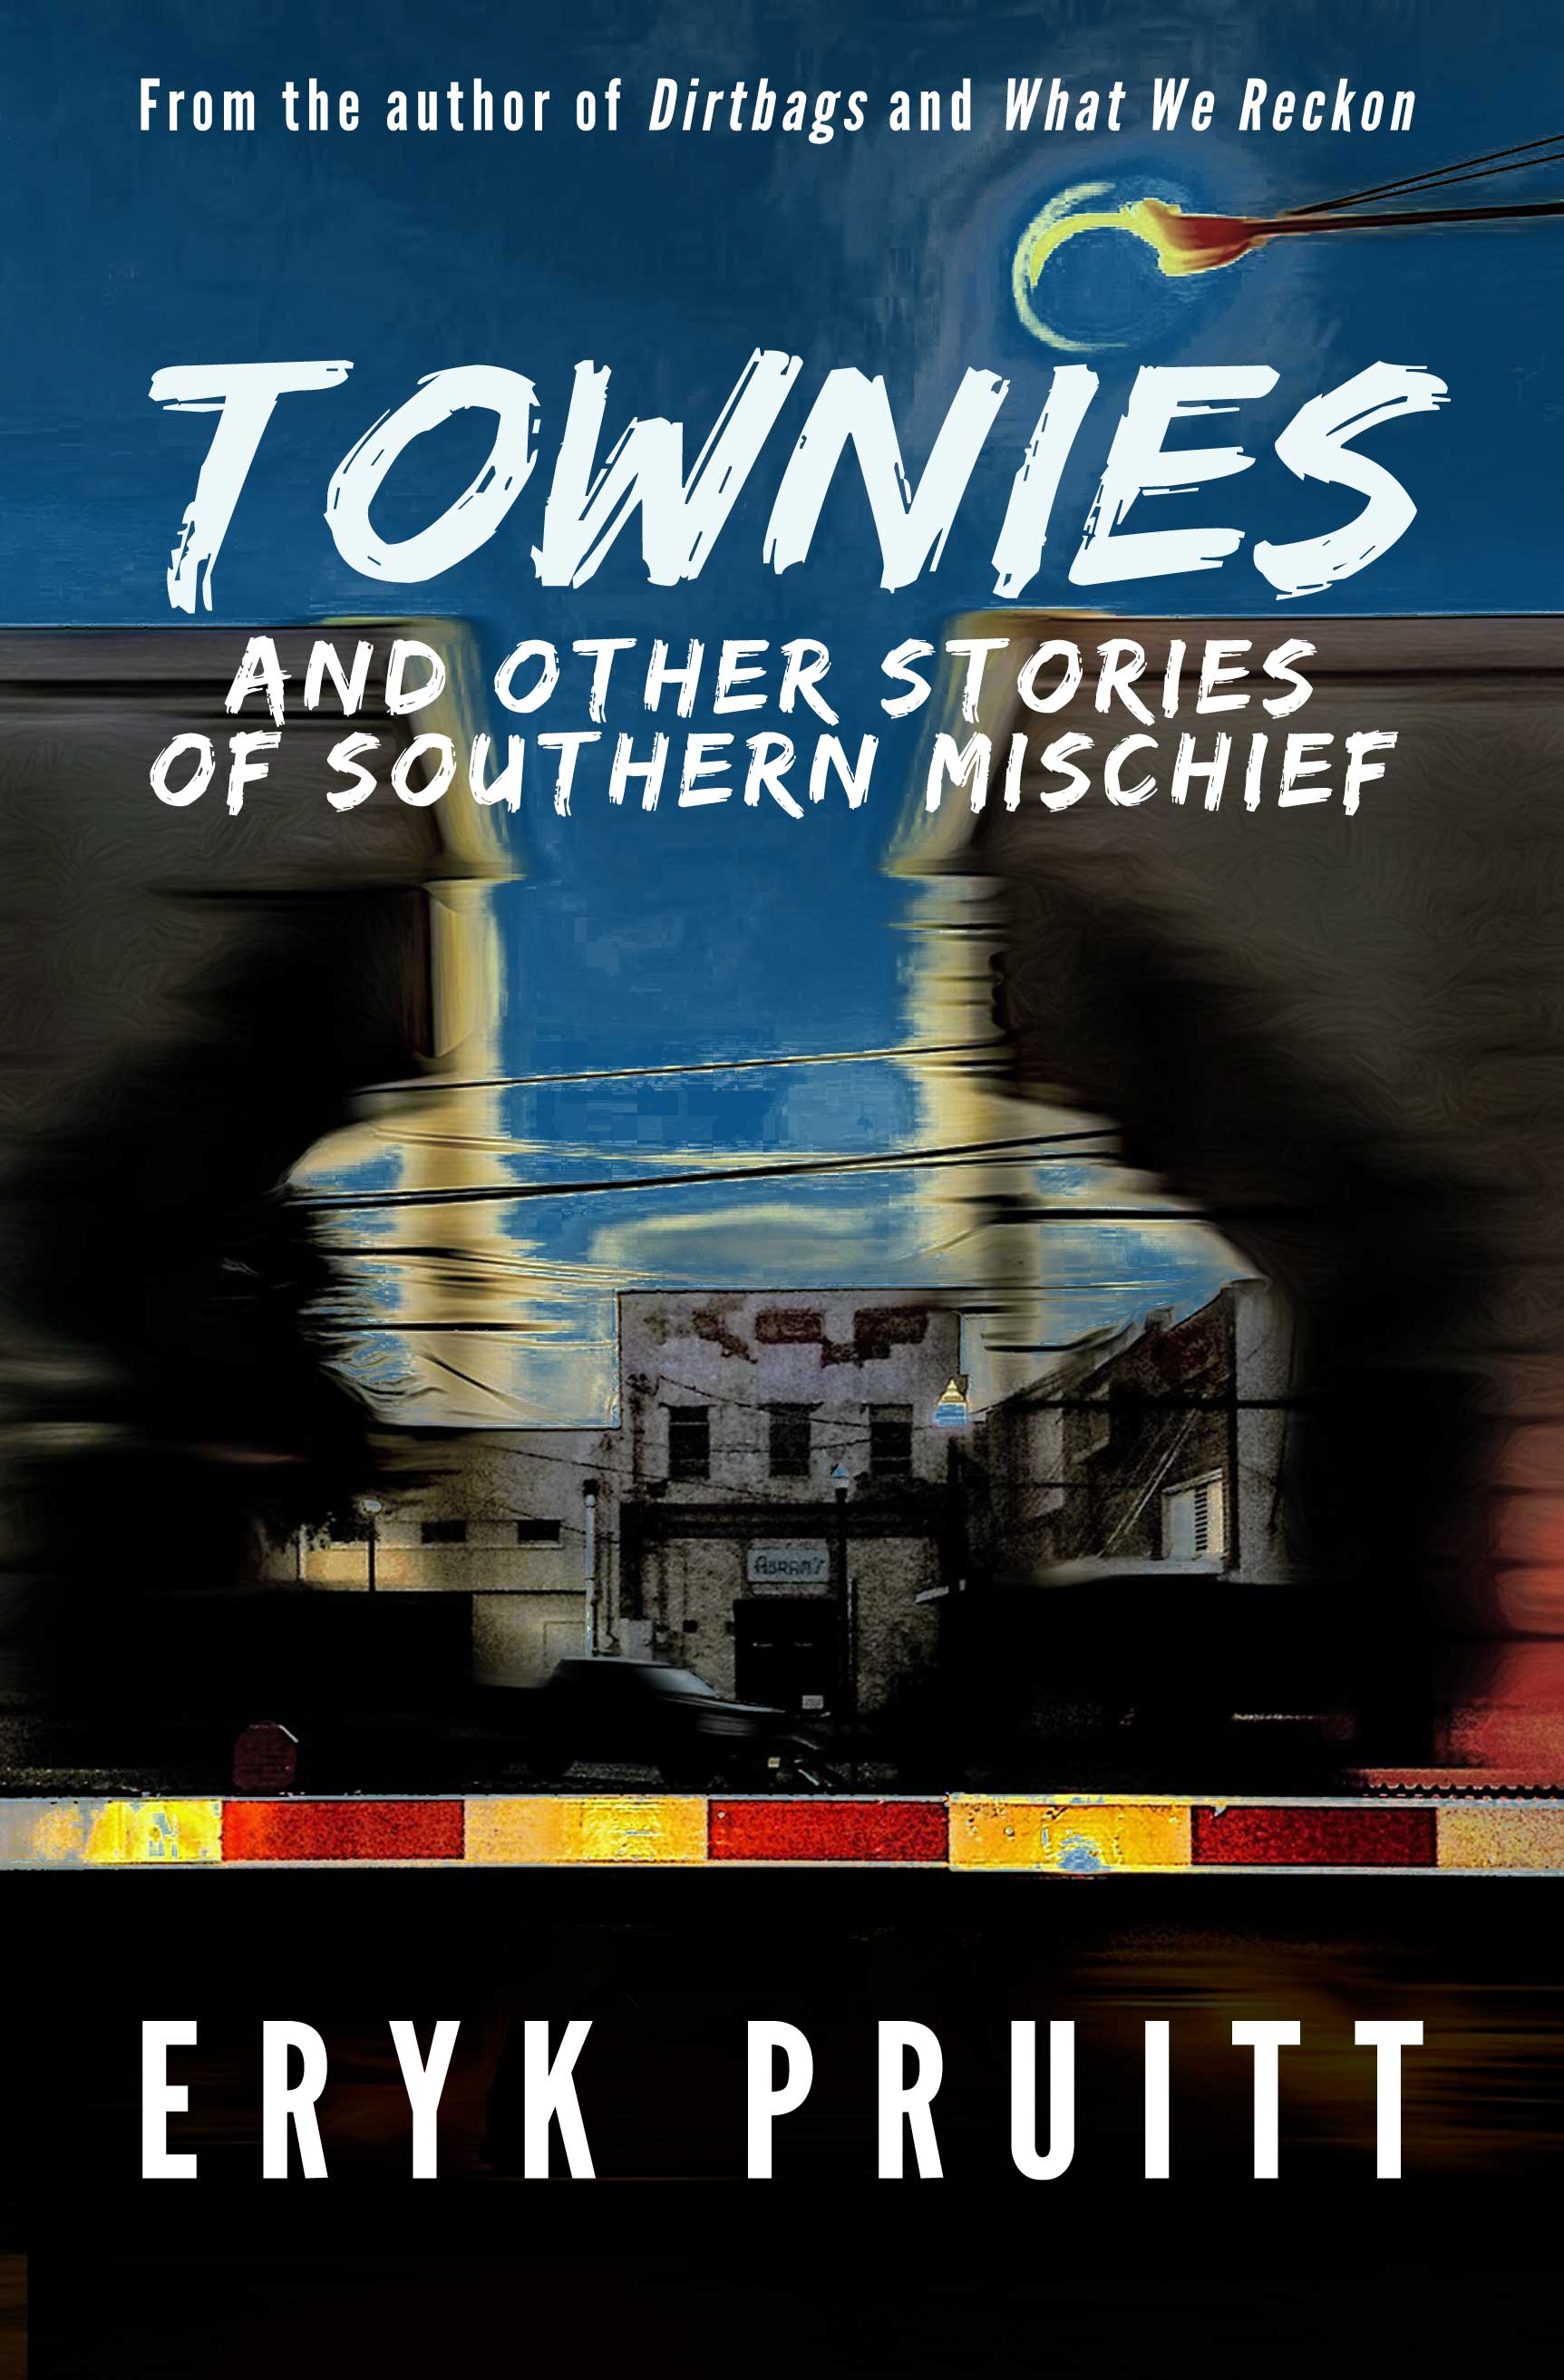 Townies and other tales of Southern Noir, by Eryk Pruitt